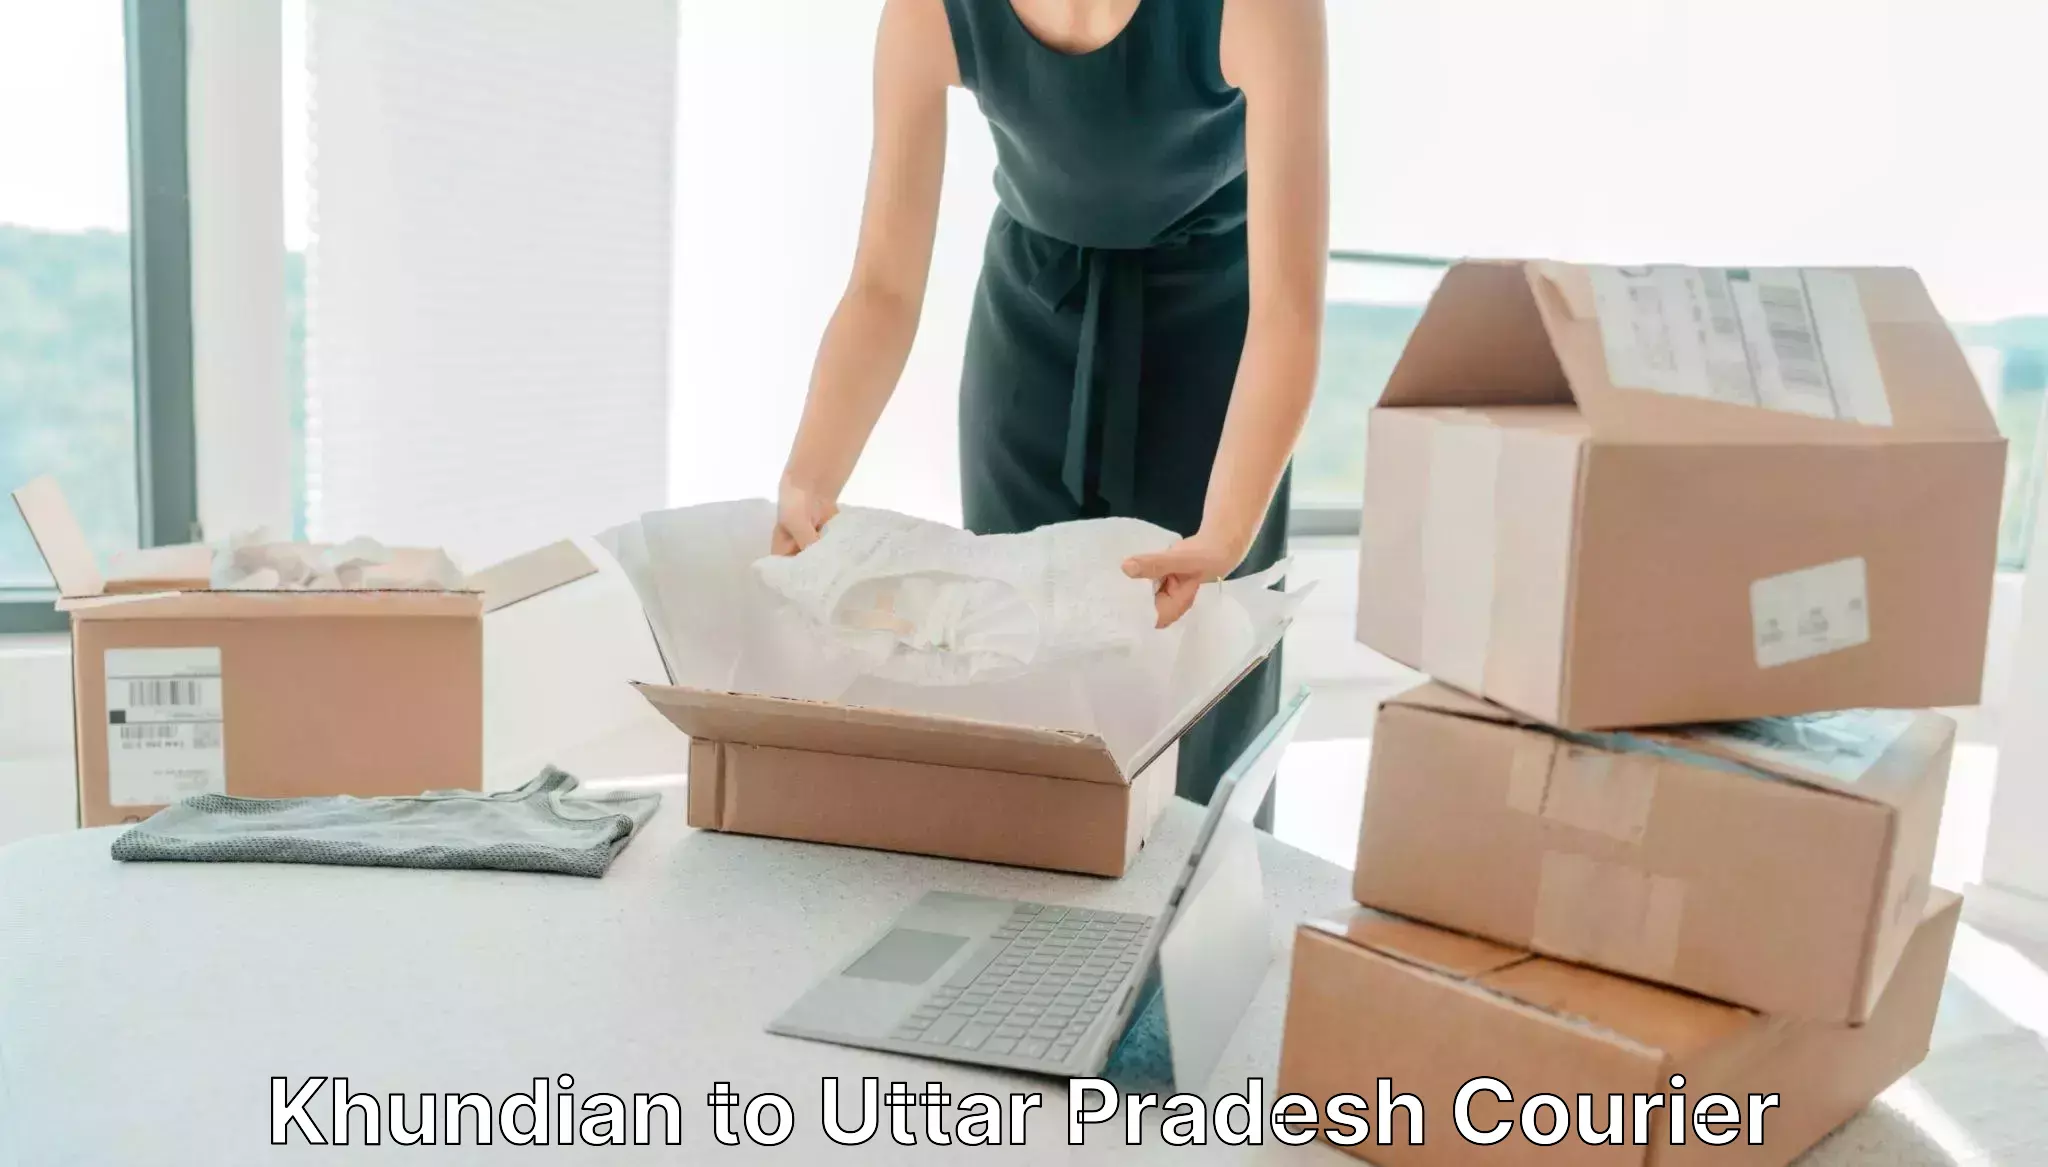 Automated shipping processes Khundian to Baghpat